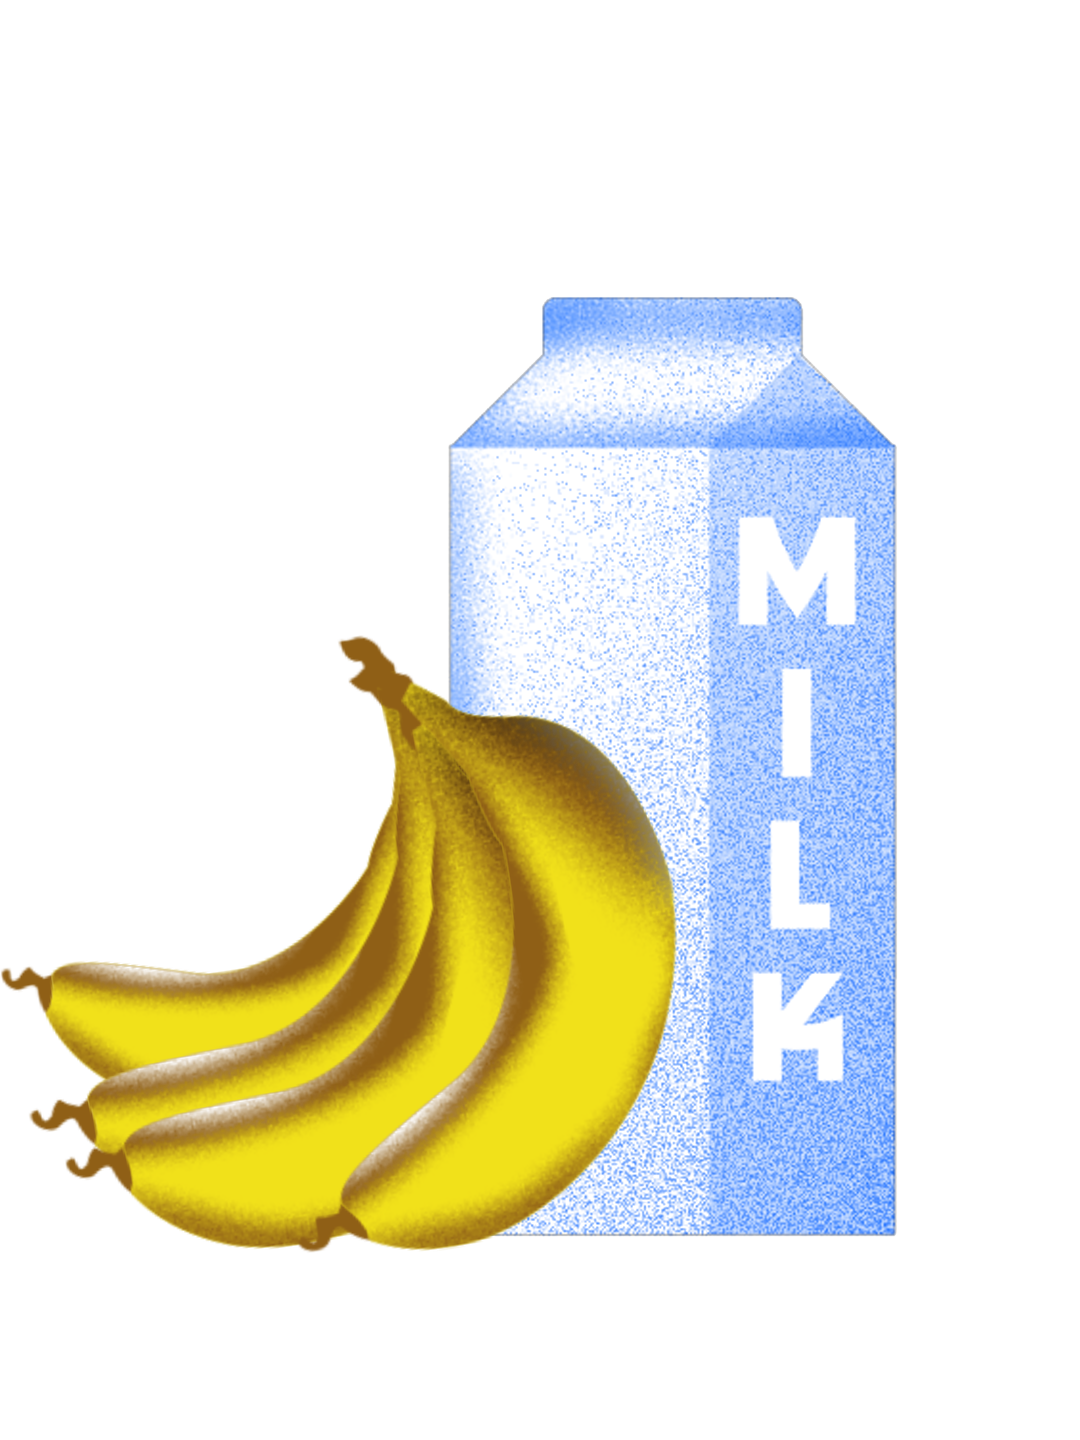 Illustration of a bunch of bananas and carton of milk